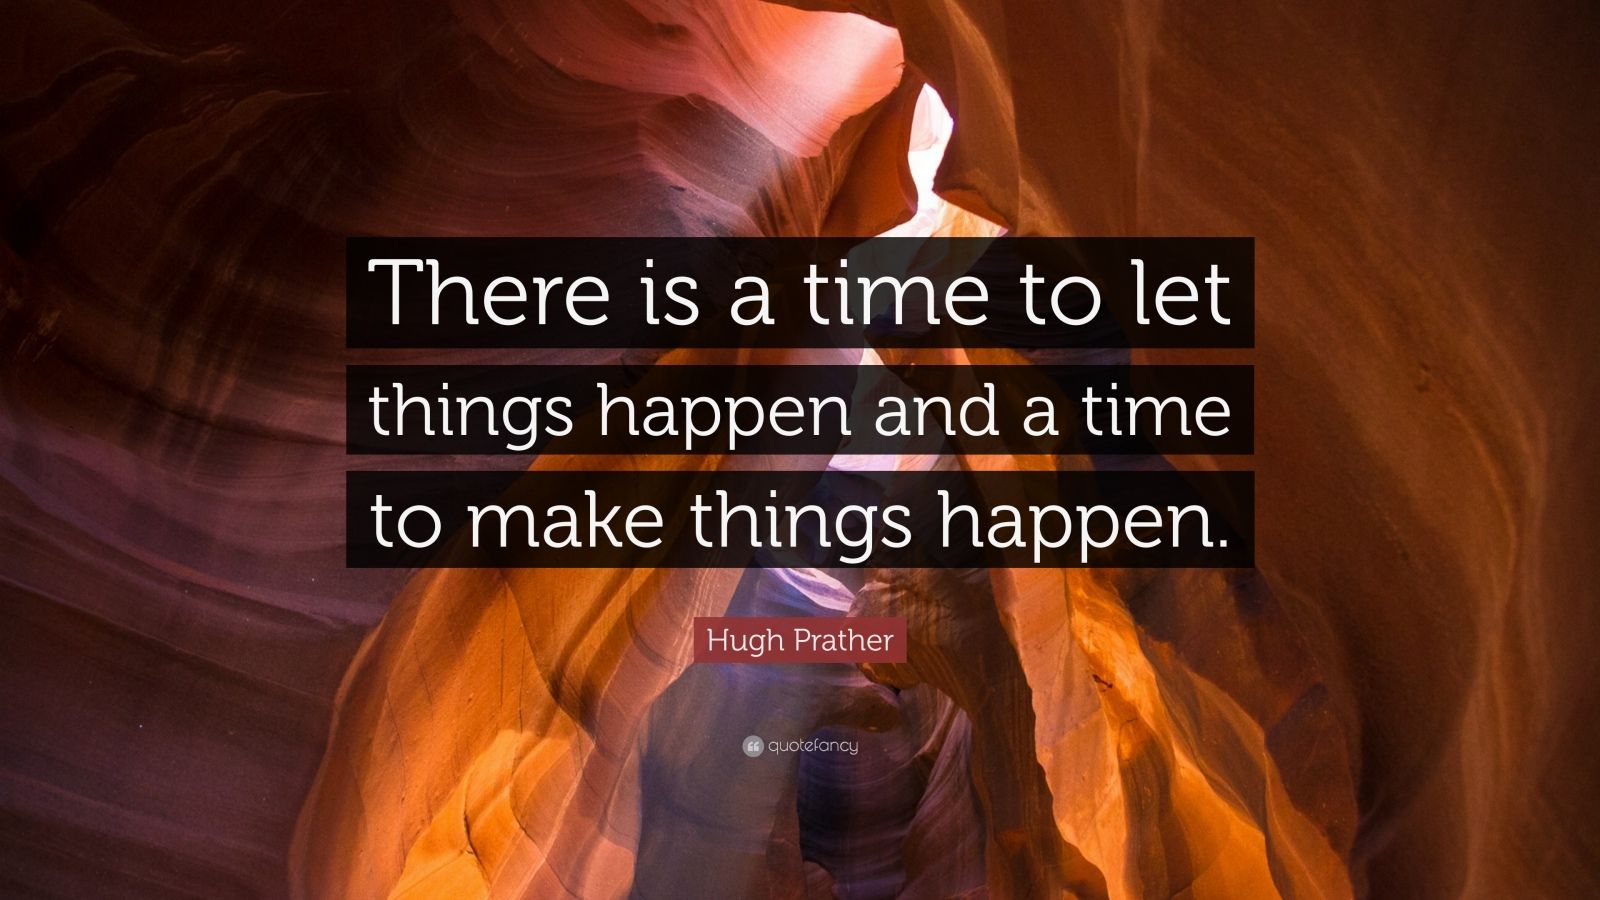 Hugh Prather Quote: “There is a time to let things happen and a time to ...